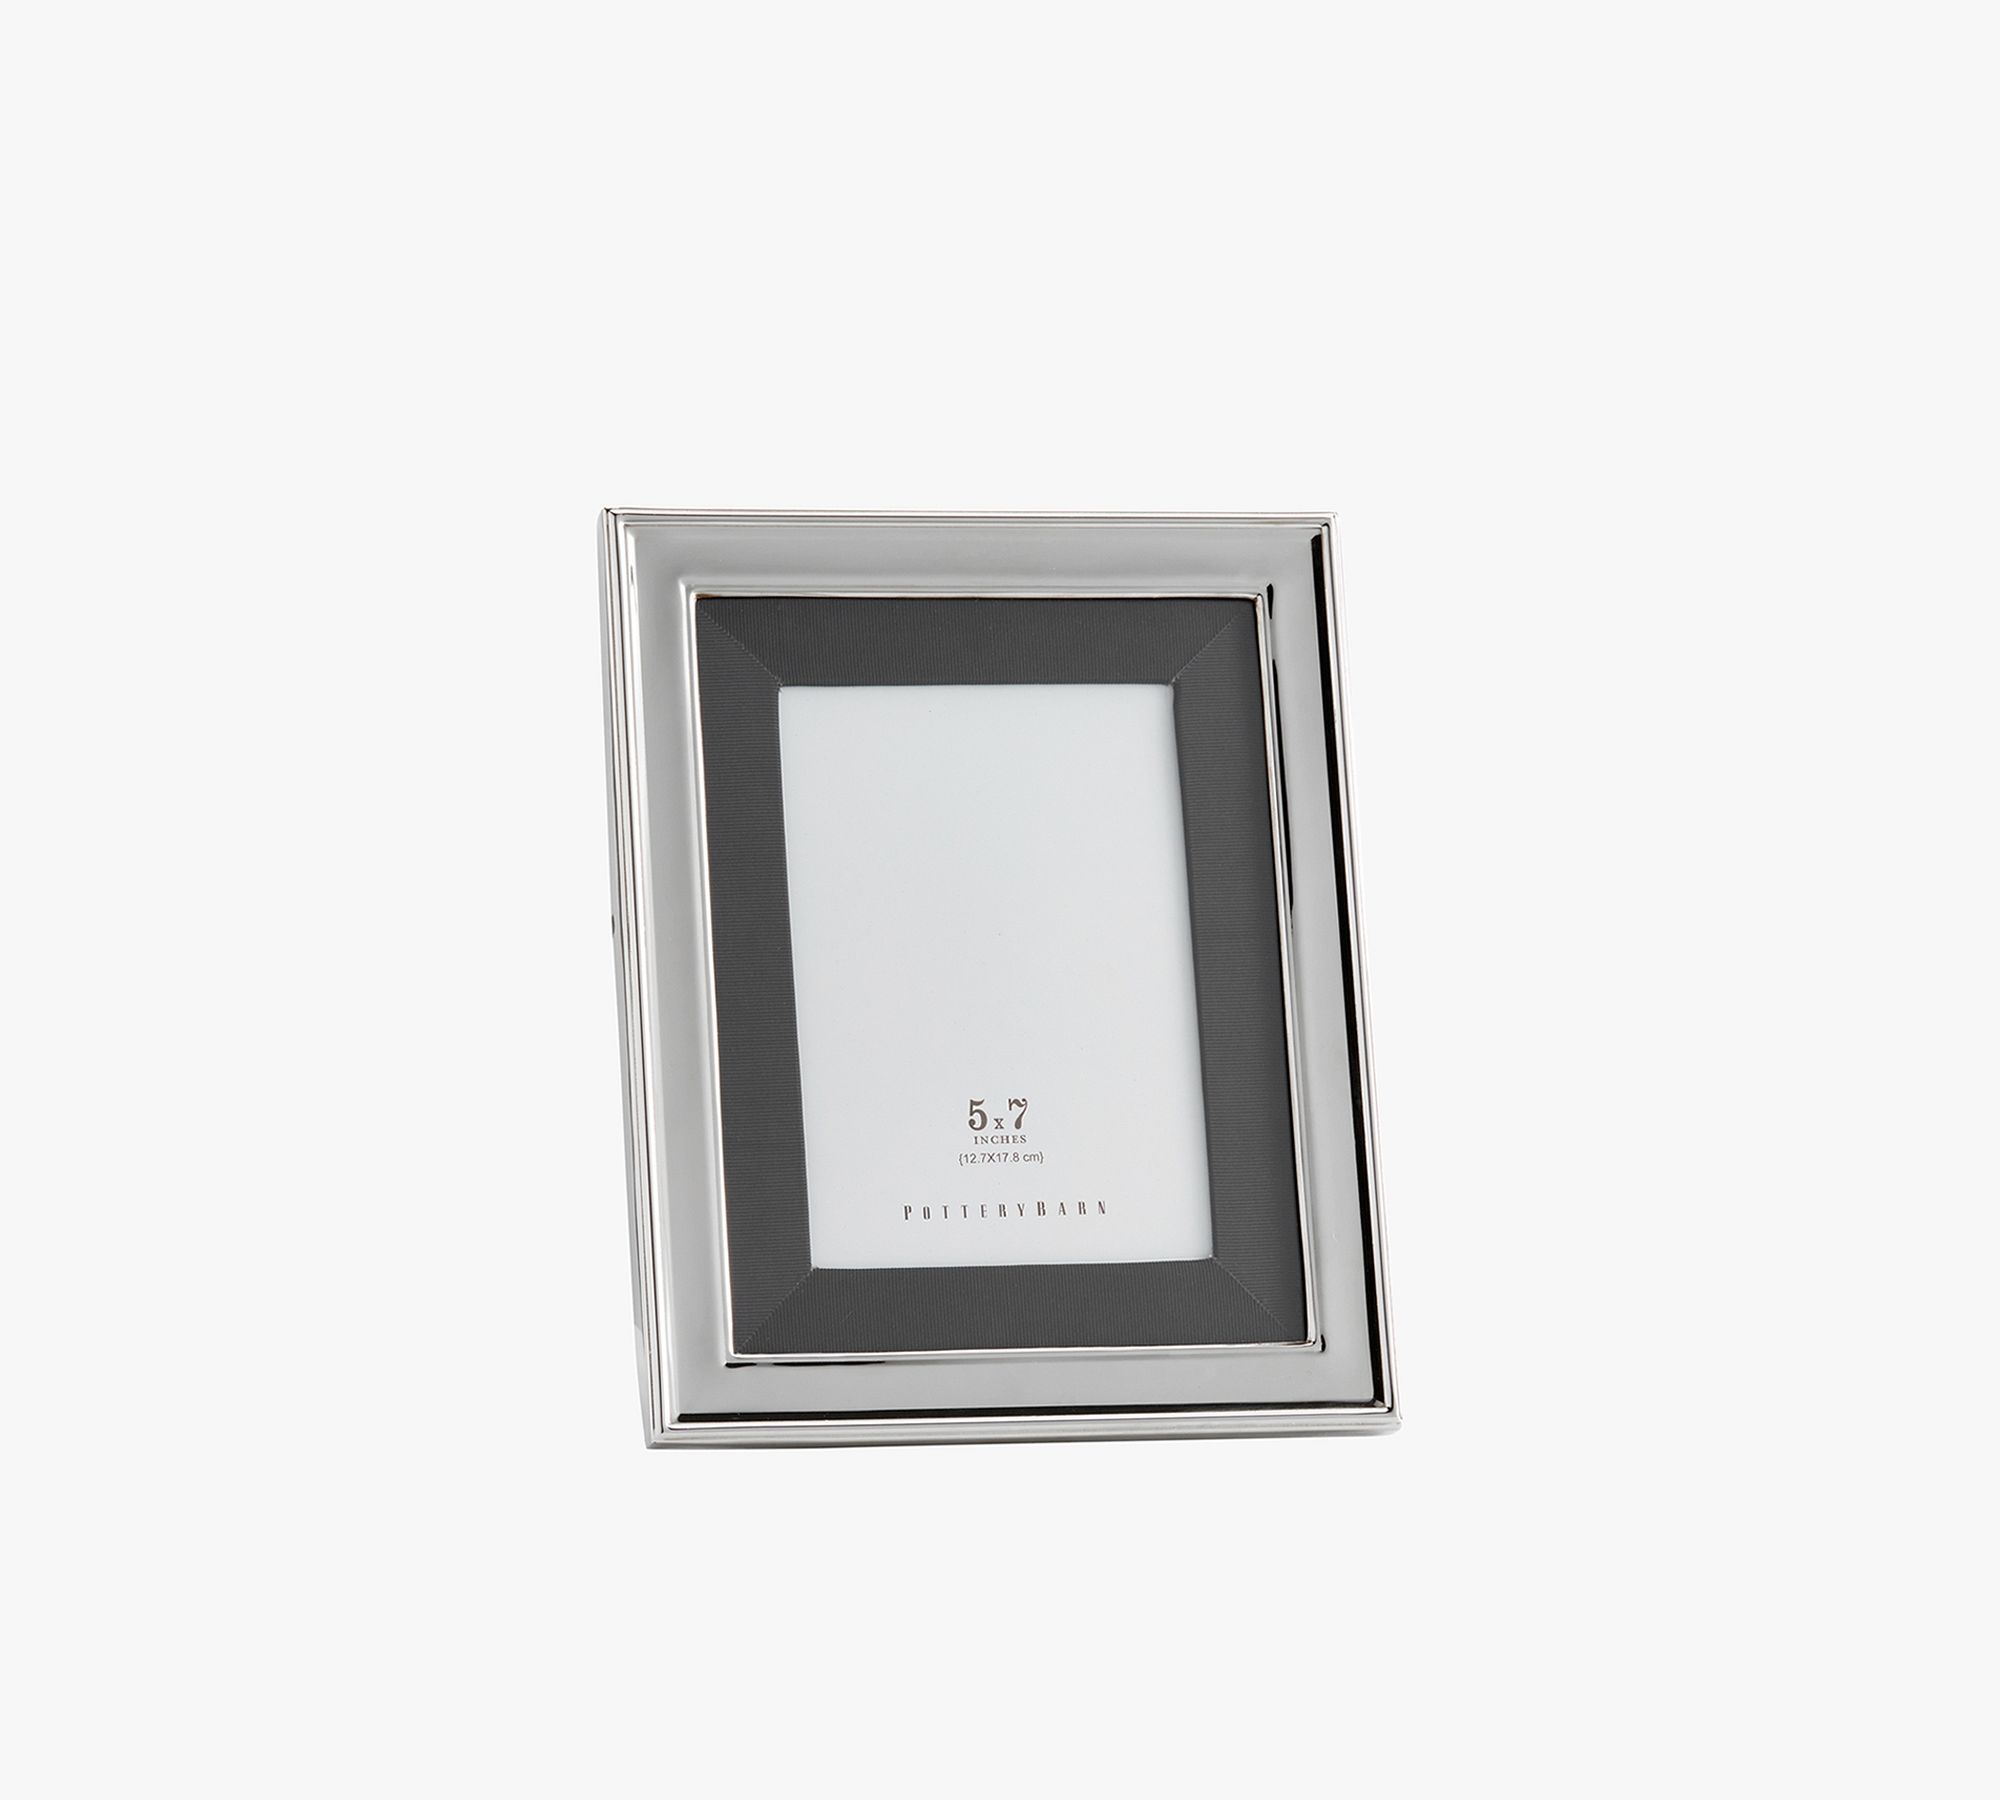 Personalized Silver-Plated Picture Frames